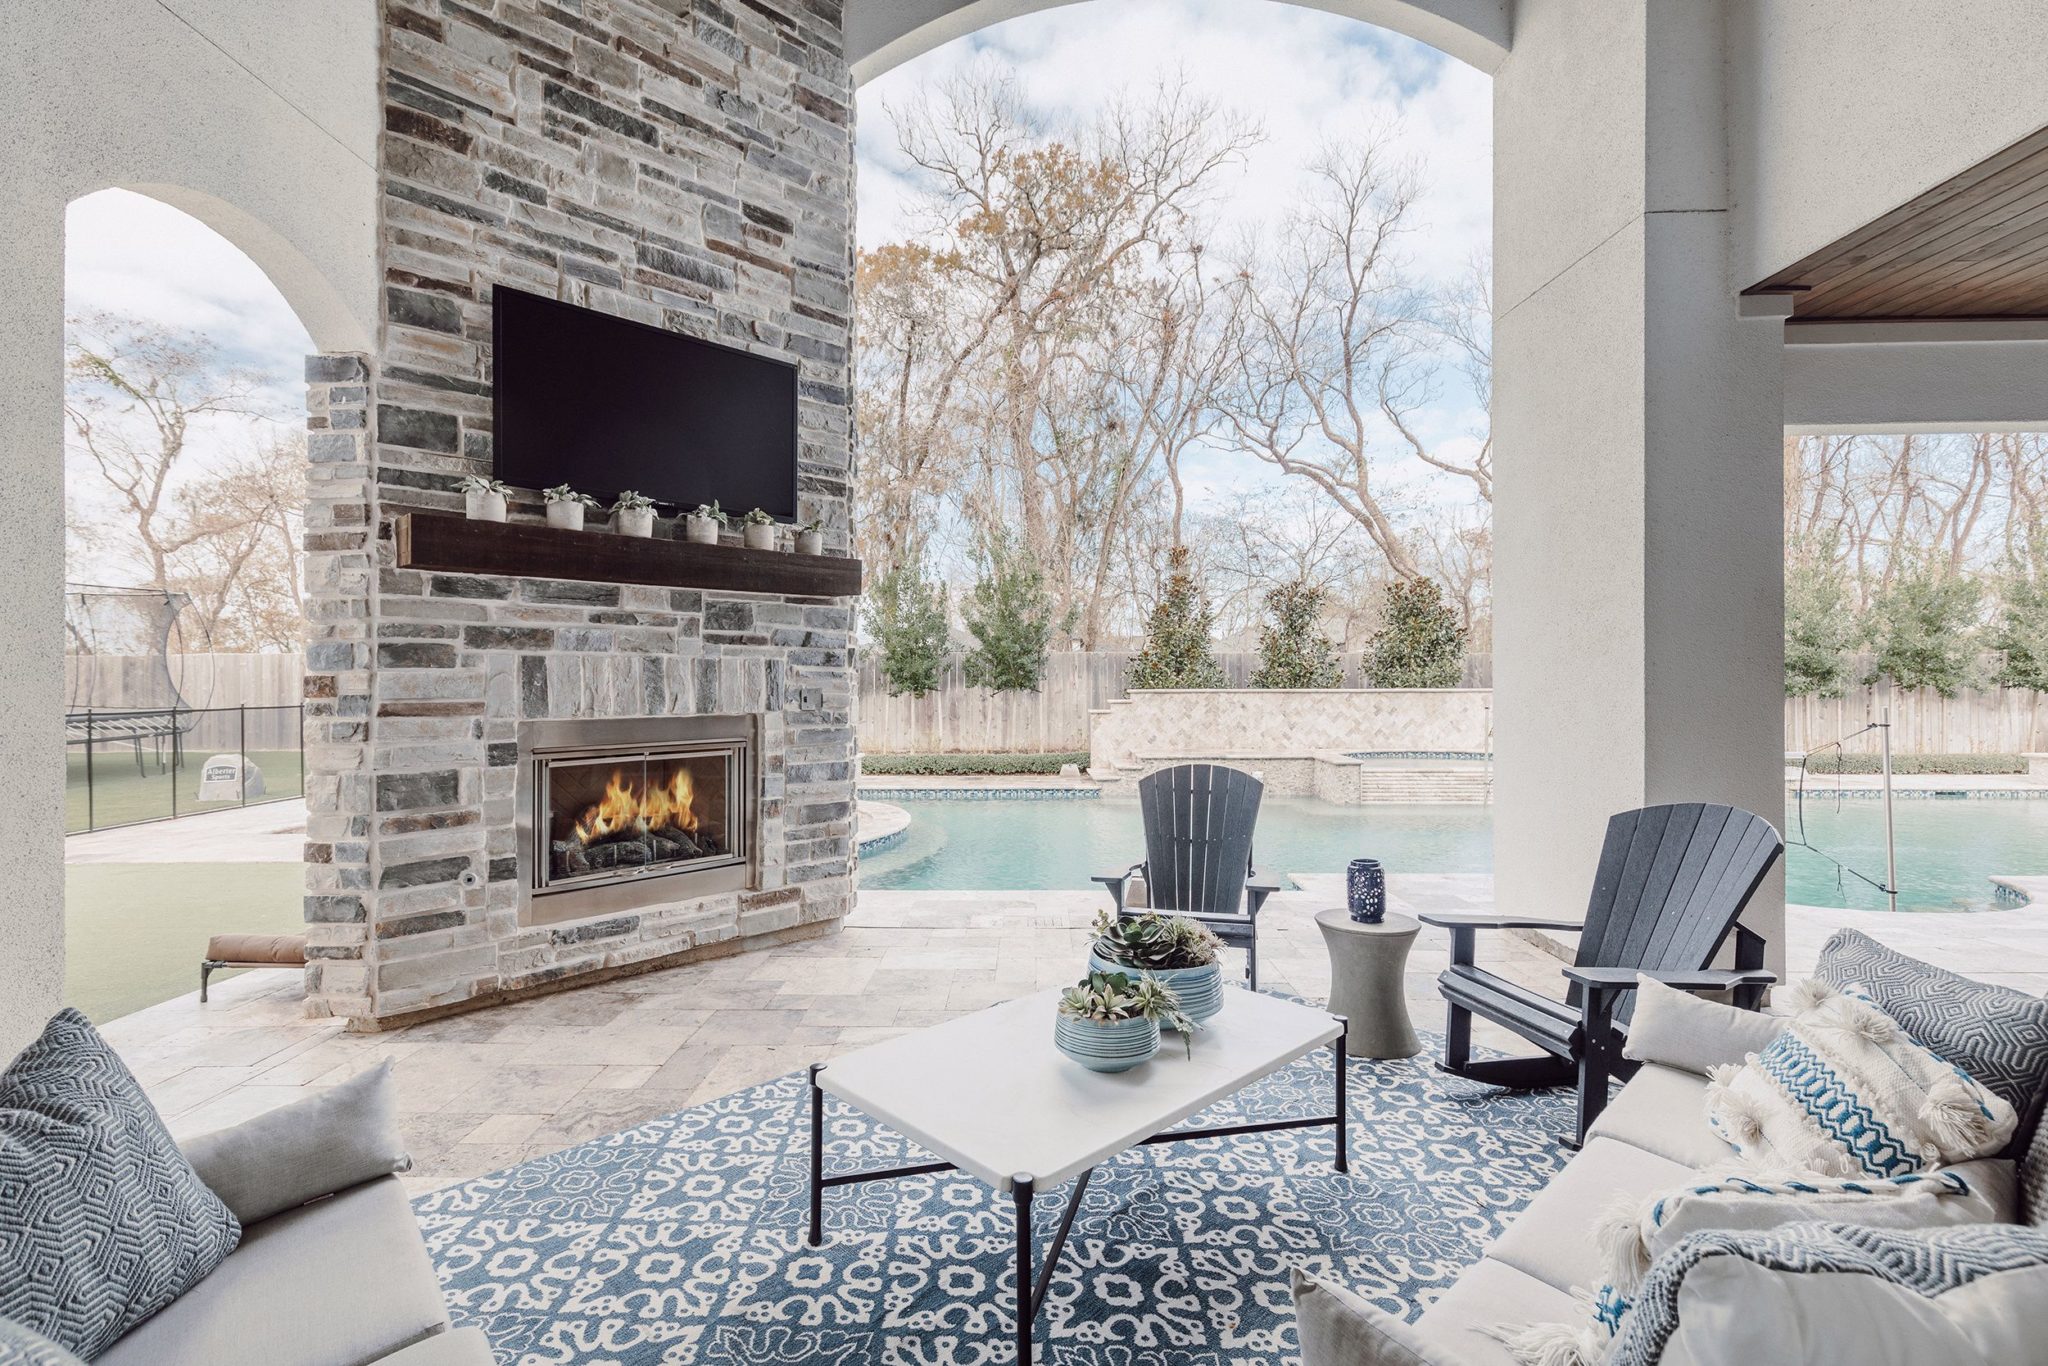 Getting your outdoor living space ready for colder weather